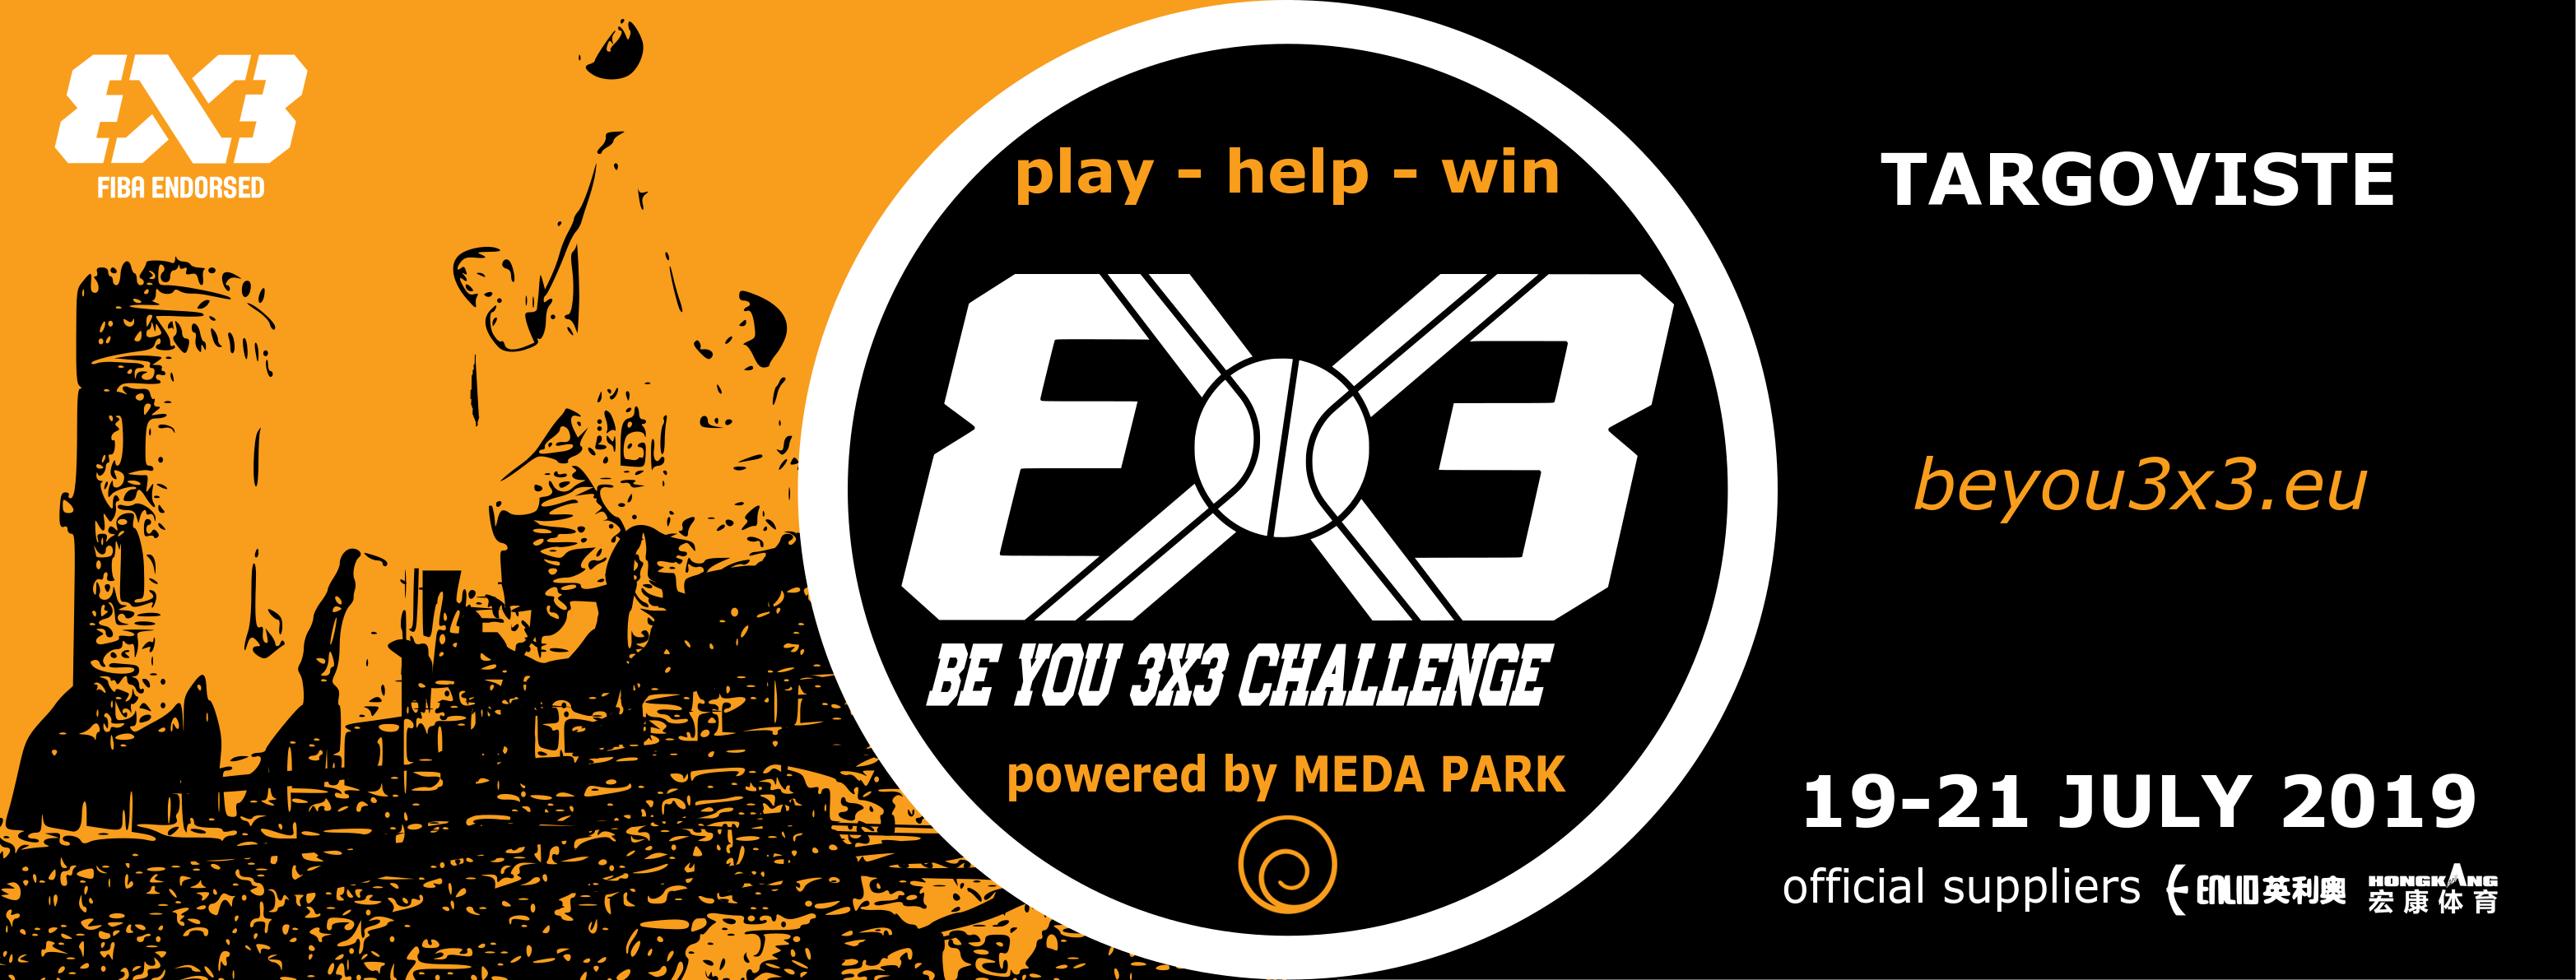 Be You 3X3 Challenge powered by Meda Park 